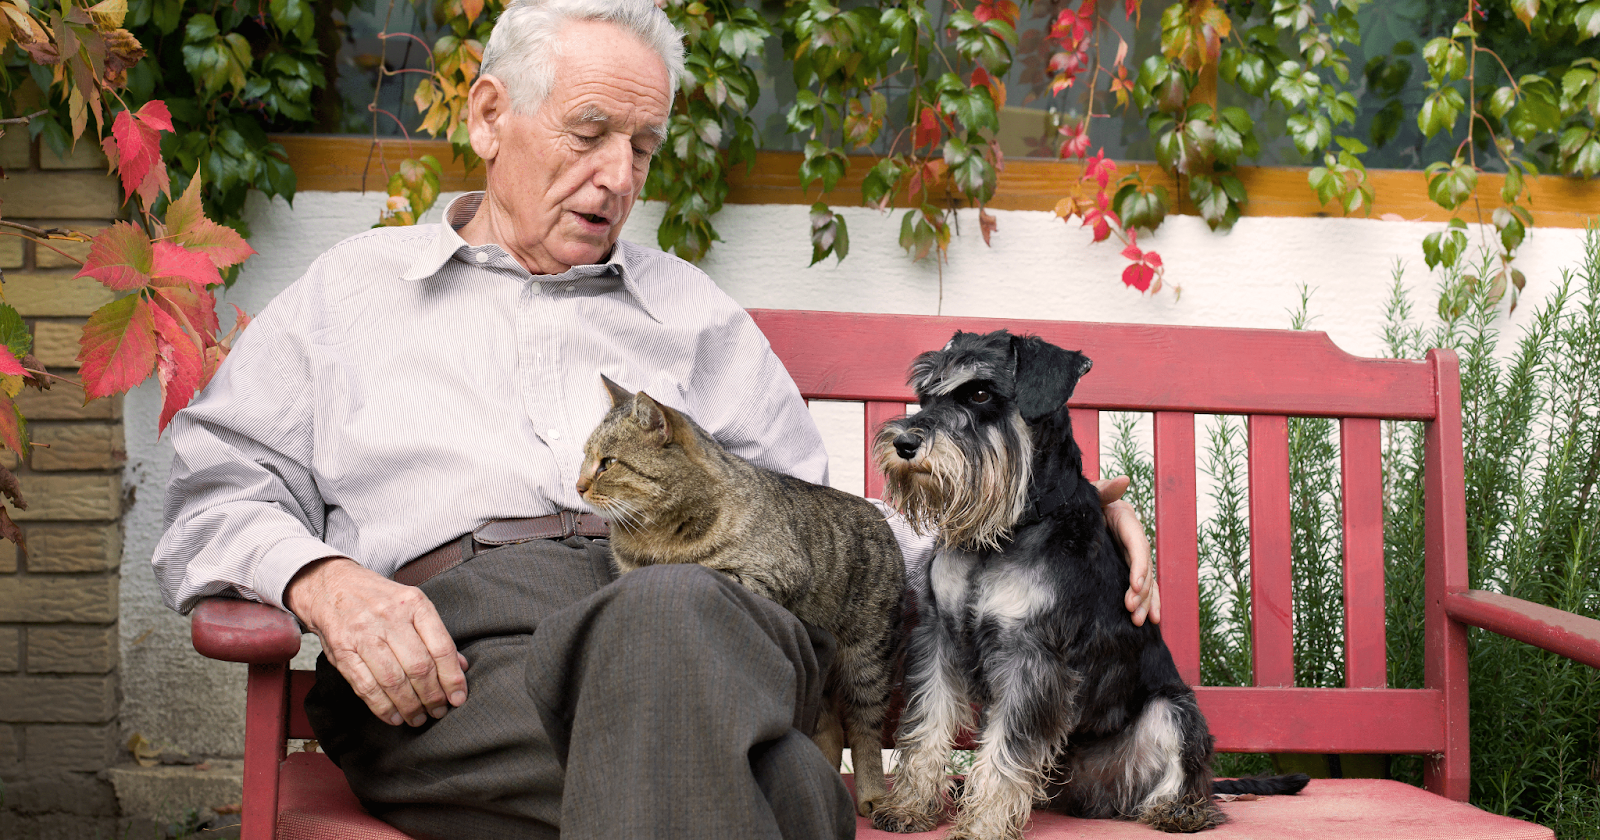 old man sat on red bench with cat and dog